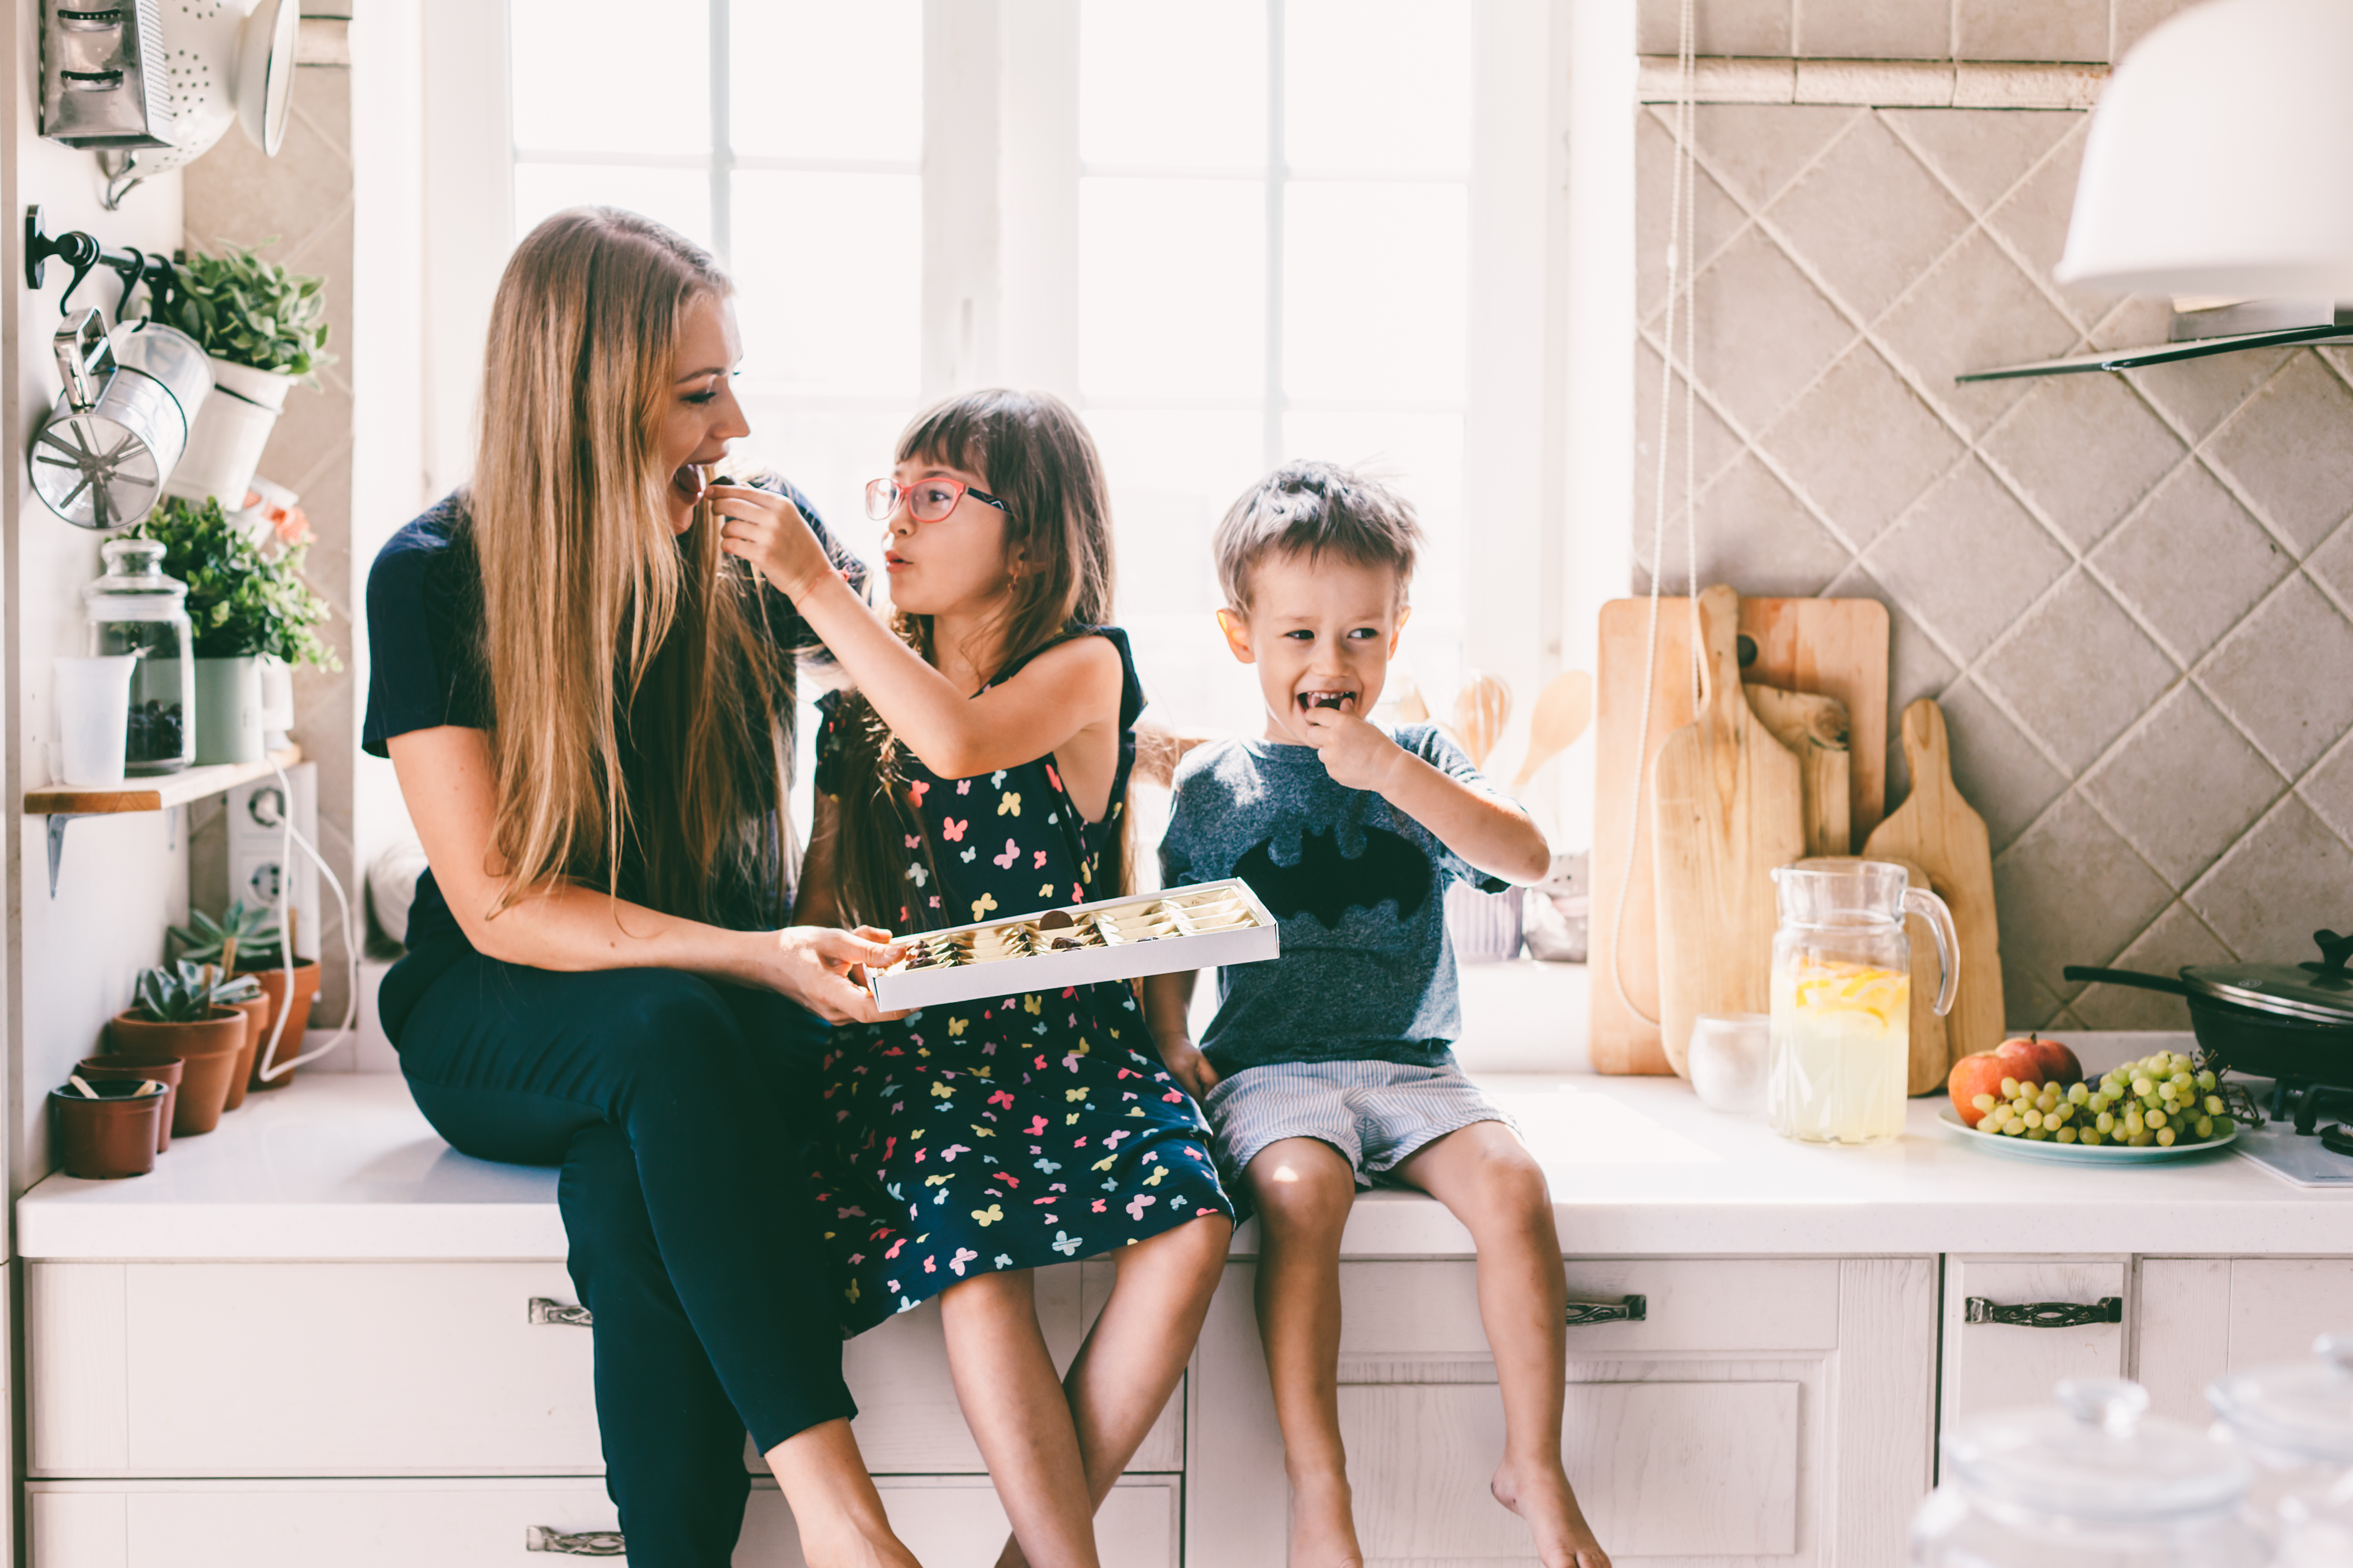 Woman and two kids sitting on the kitchen counter eating out of a snack box